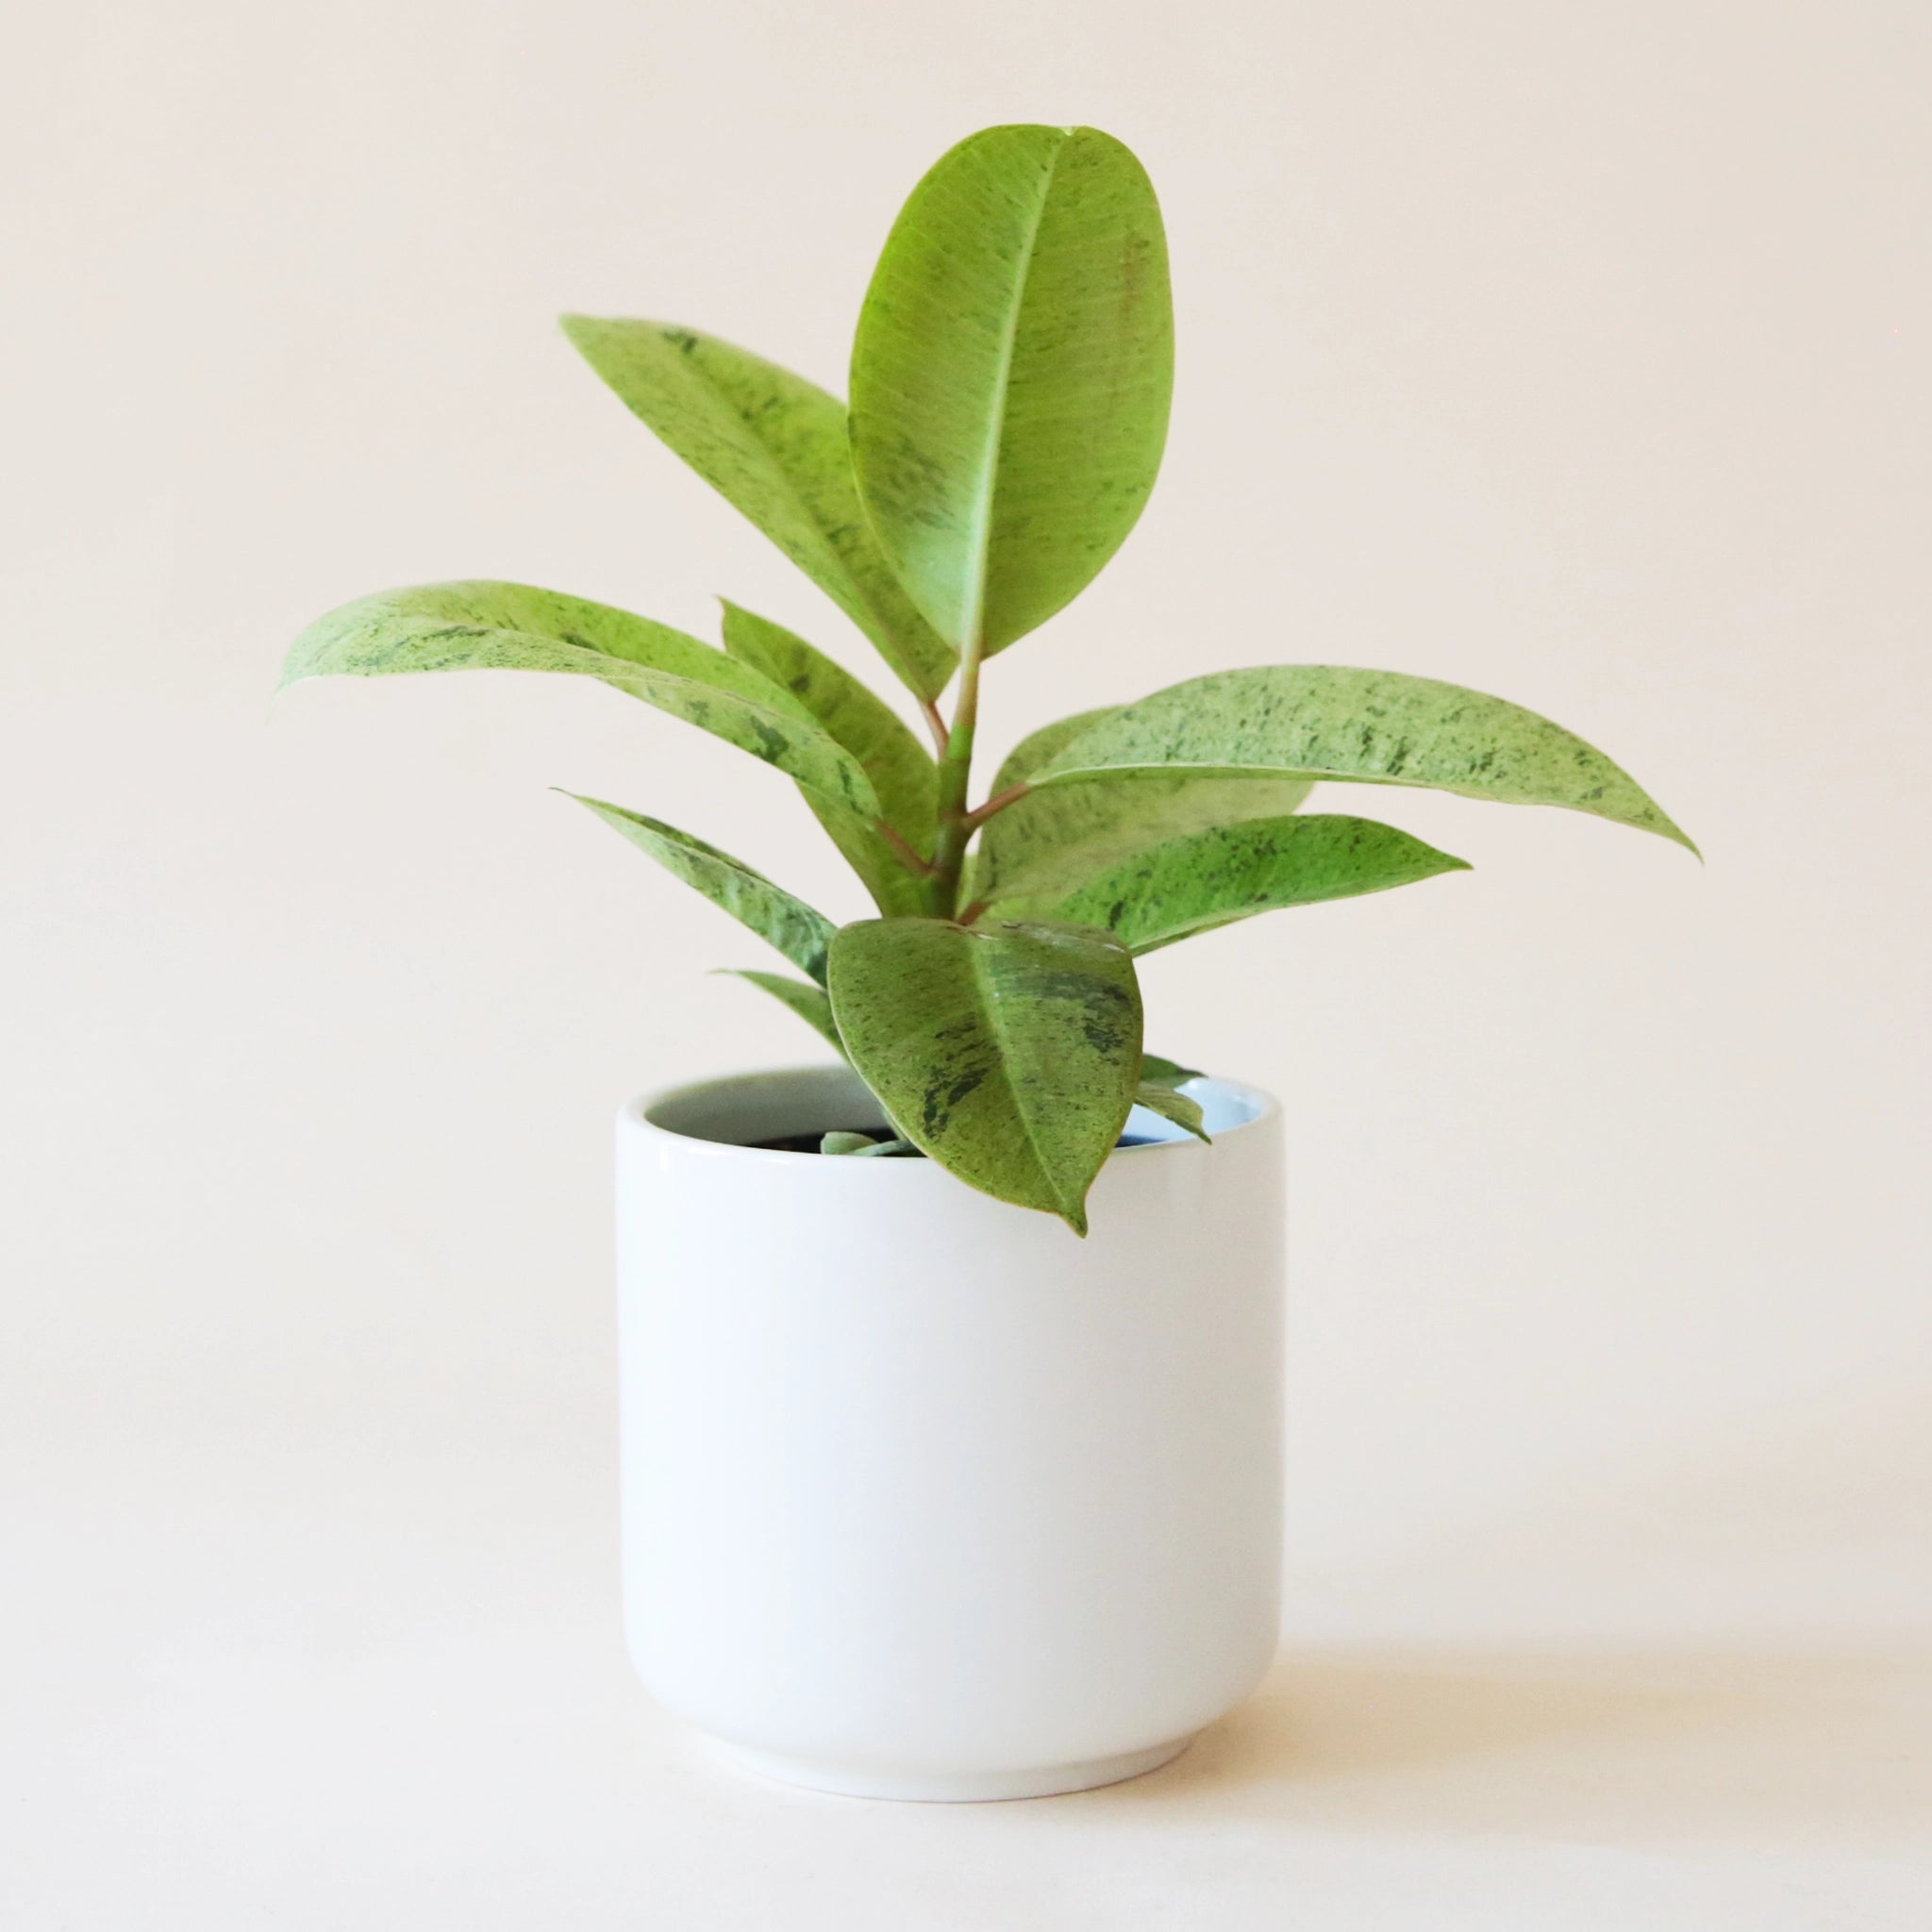 n a cream background is a Ficus Shiverieana with green leaves and photographed in a white ceramic planter